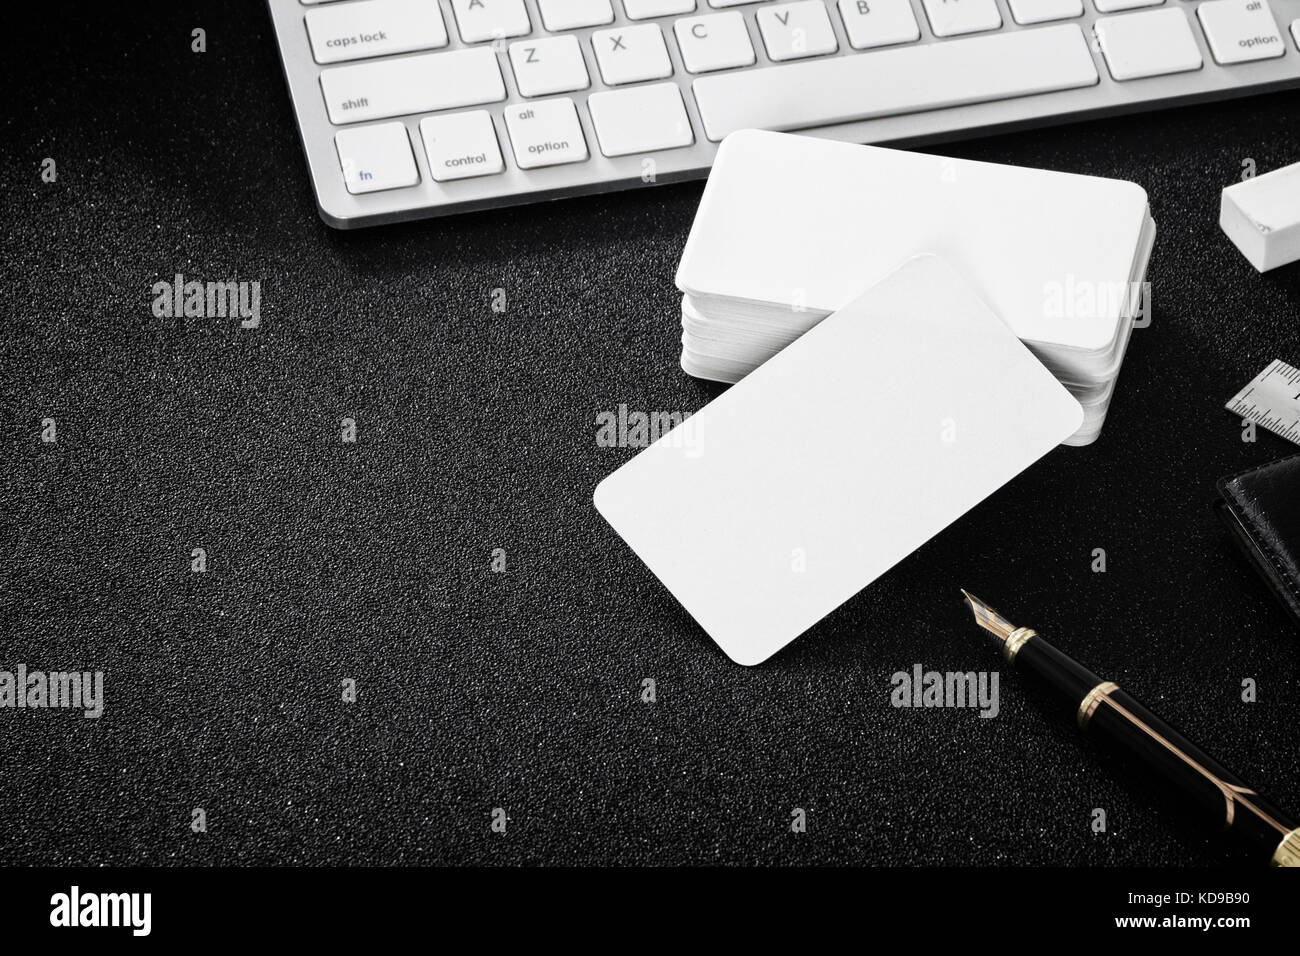 Blank business card mockup on table for design business contact Stock Photo